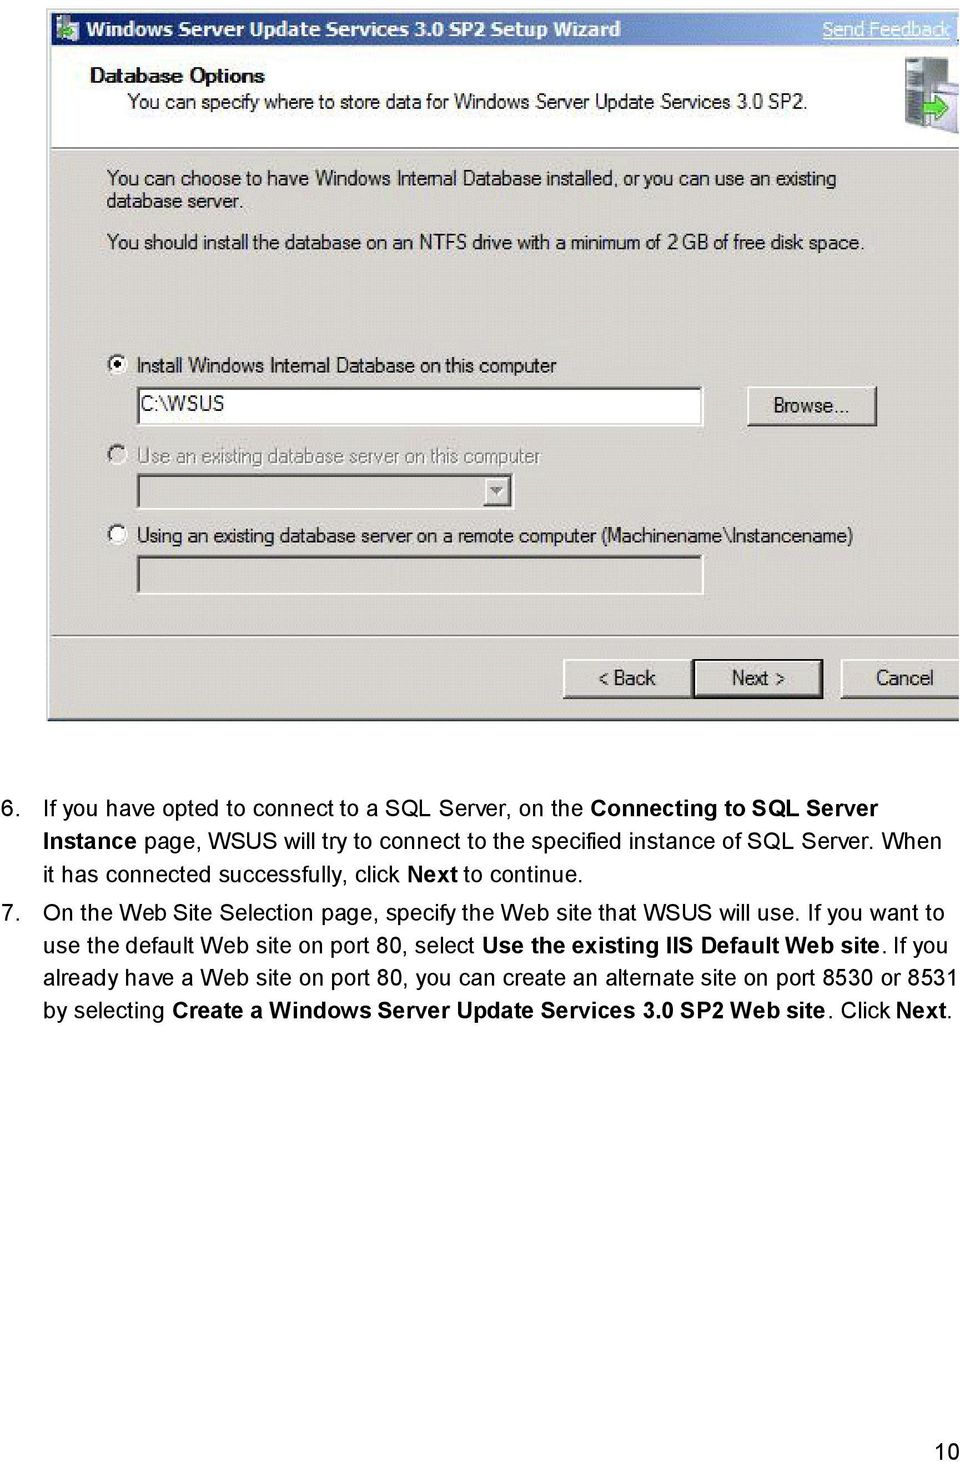 On the Web Site Selection page, specify the Web site that WSUS will use.